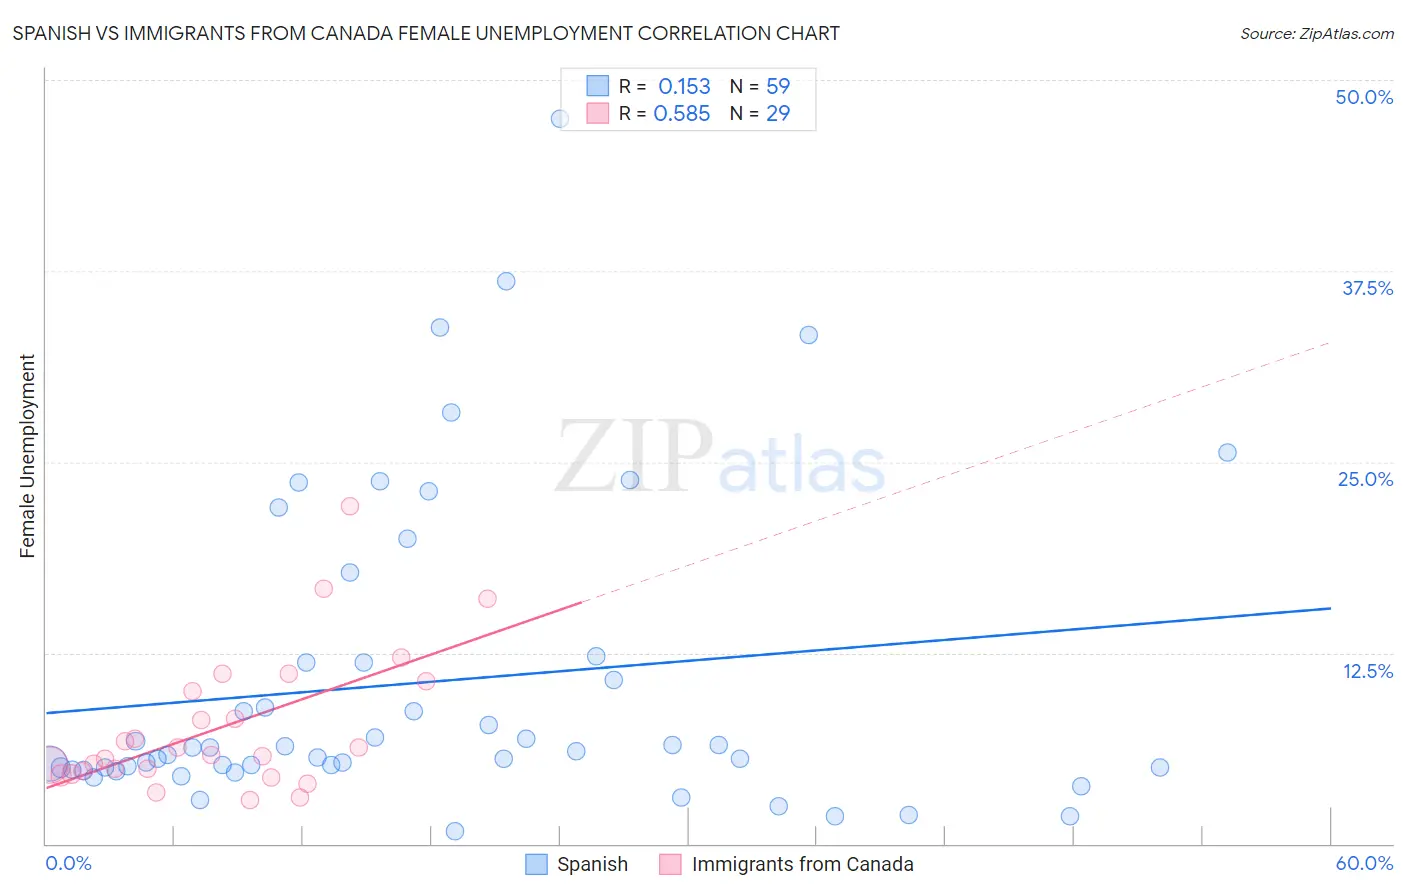 Spanish vs Immigrants from Canada Female Unemployment